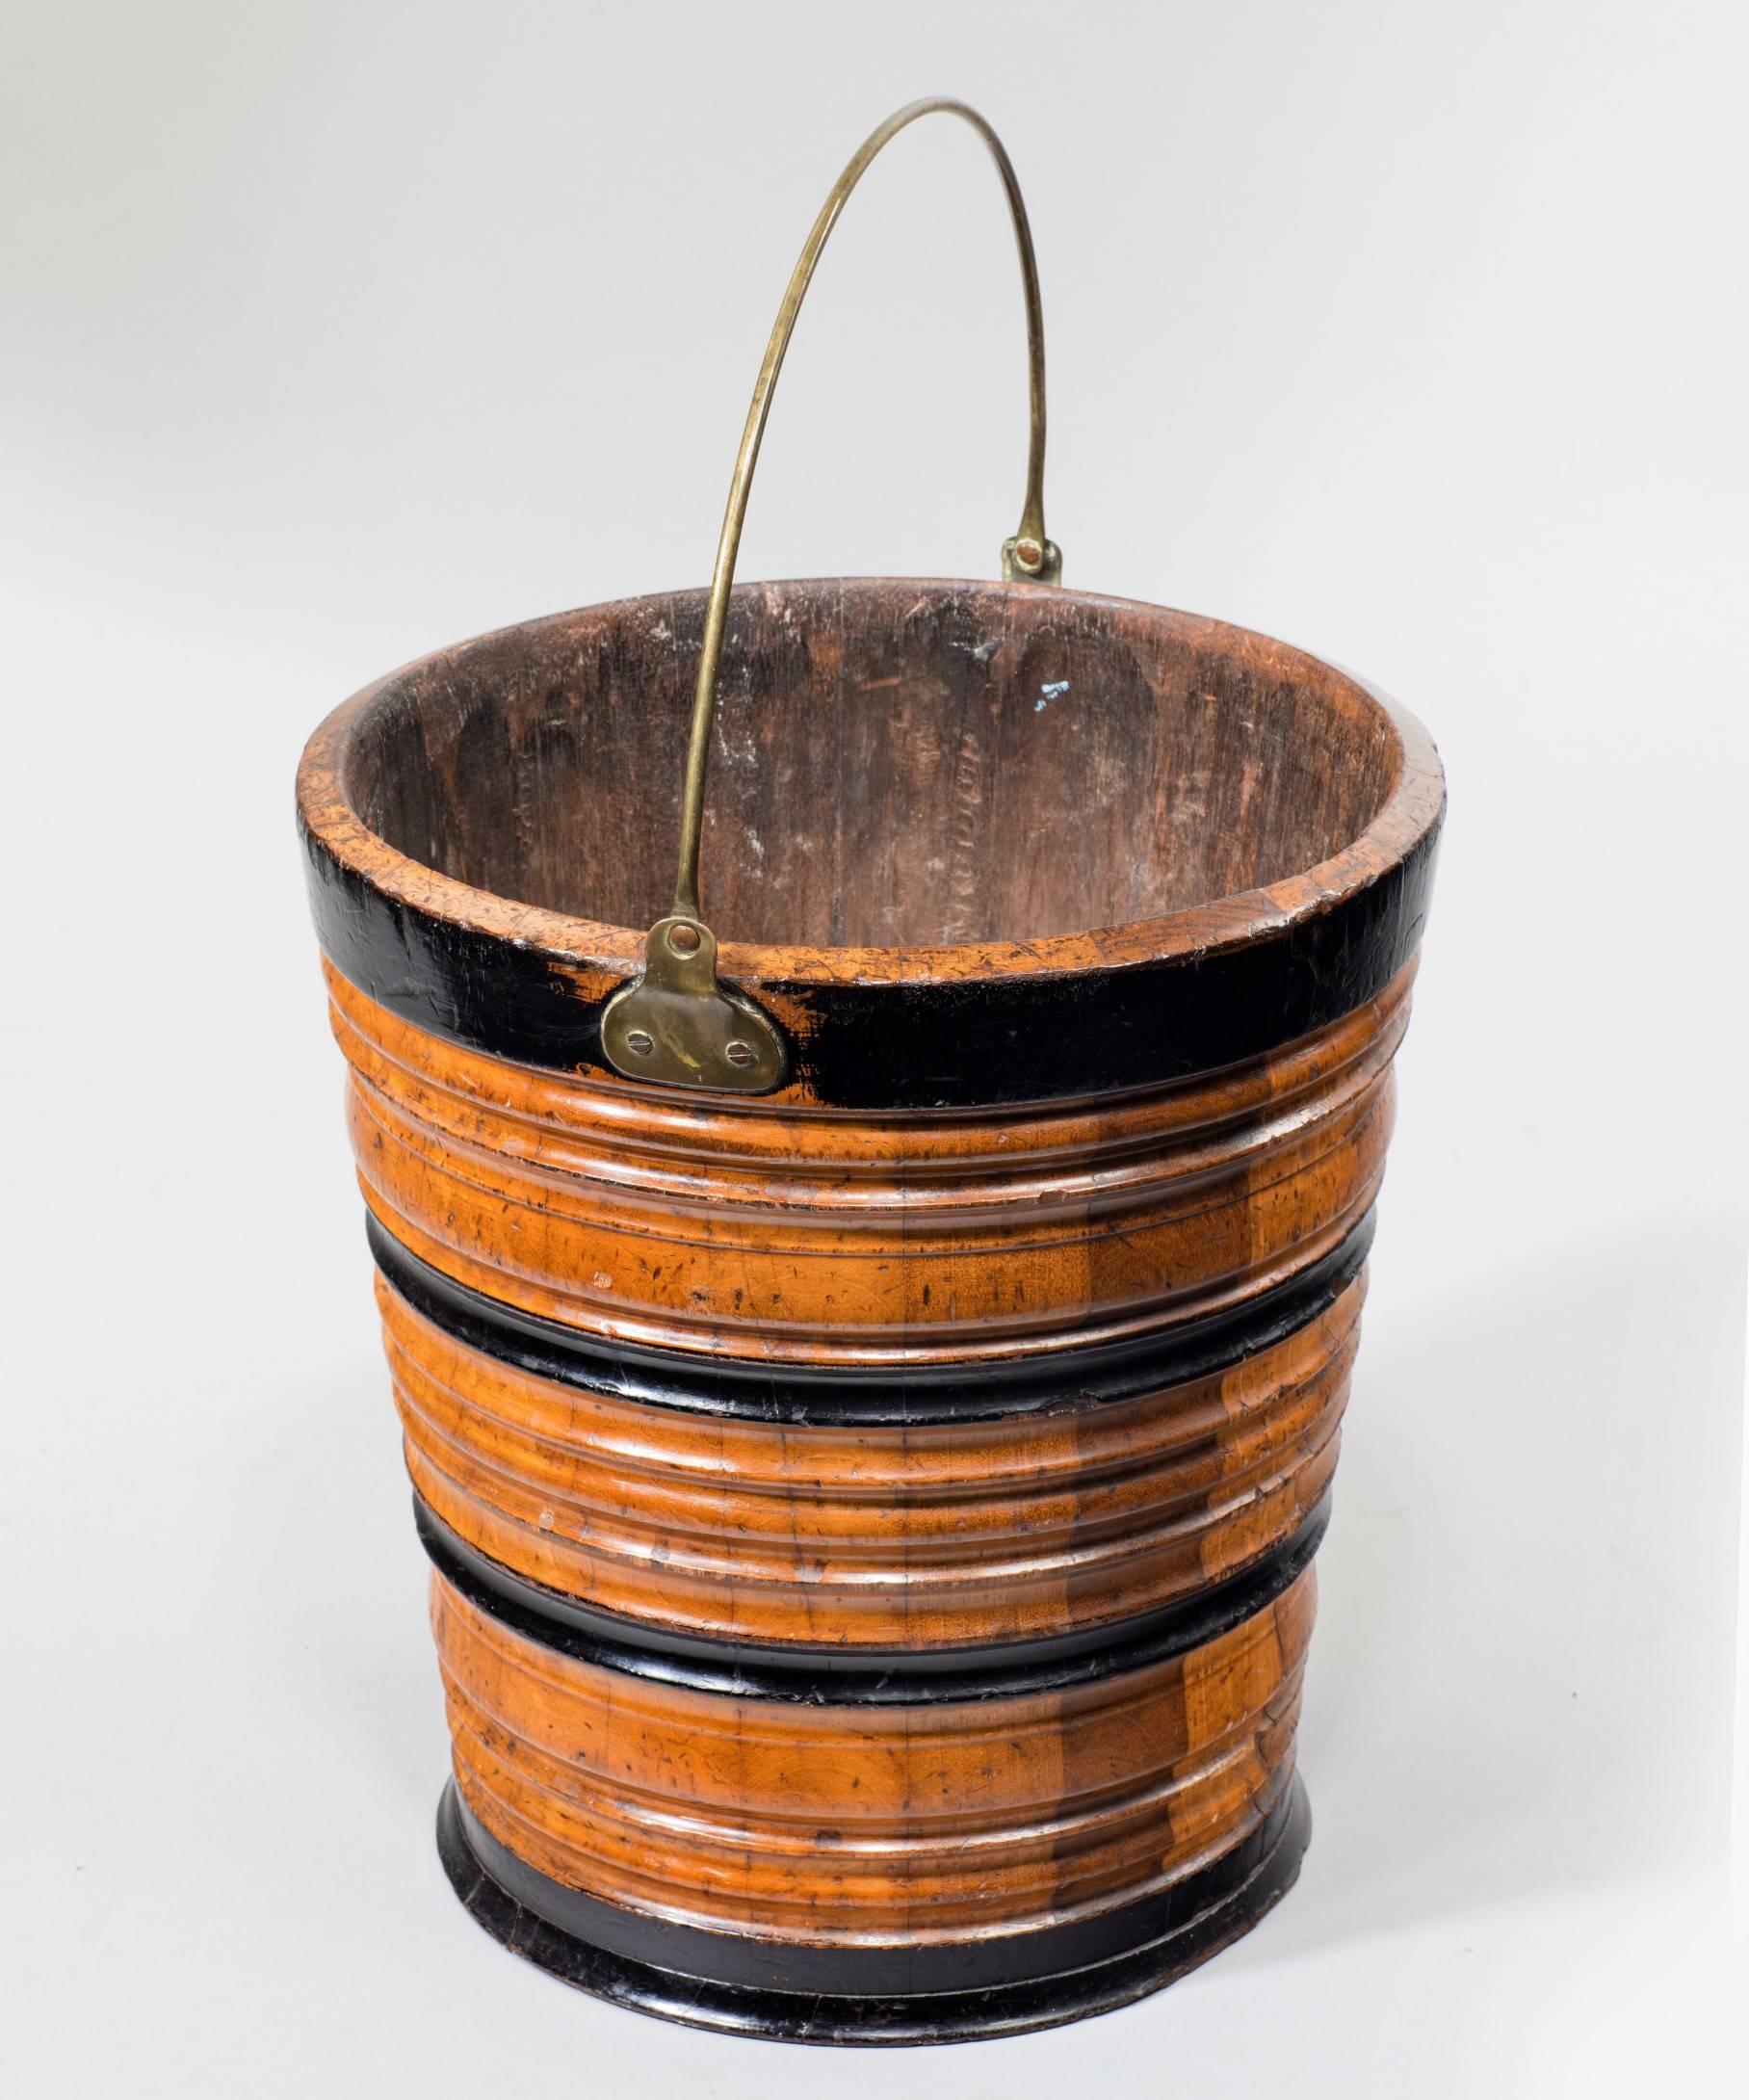 A 19th century Dutch bucket in fruitwood and ebonised wood of coopered construction with a ribbed body and a brass carrying handle. This bucket is often referred to as a 'Teestoof' which was used for keeping a kettle warm over a bed of smouldering